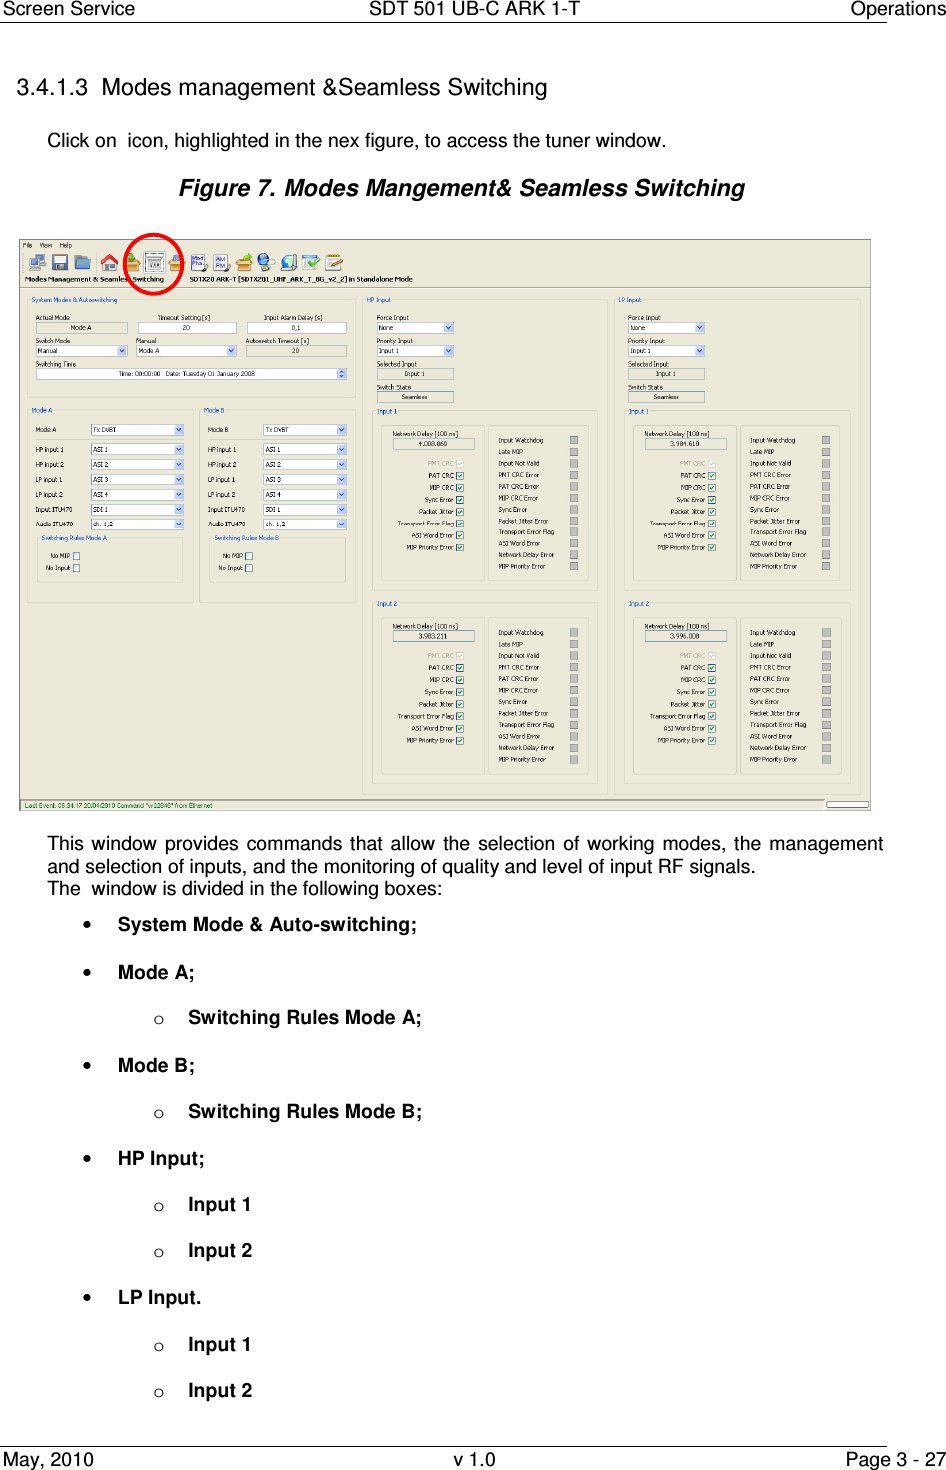 Screen Service  SDT 501 UB-C ARK 1-T  Operations May, 2010  v 1.0  Page 3 - 27 3.4.1.3  Modes management &amp;Seamless Switching  Click on  icon, highlighted in the nex figure, to access the tuner window. Figure 7. Modes Mangement&amp; Seamless Switching   This window  provides  commands that  allow  the  selection  of  working modes, the  management and selection of inputs, and the monitoring of quality and level of input RF signals. The  window is divided in the following boxes: • System Mode &amp; Auto-switching; • Mode A; o Switching Rules Mode A; • Mode B; o Switching Rules Mode B; • HP Input; o Input 1 o Input 2 • LP Input.  o Input 1 o Input 2 